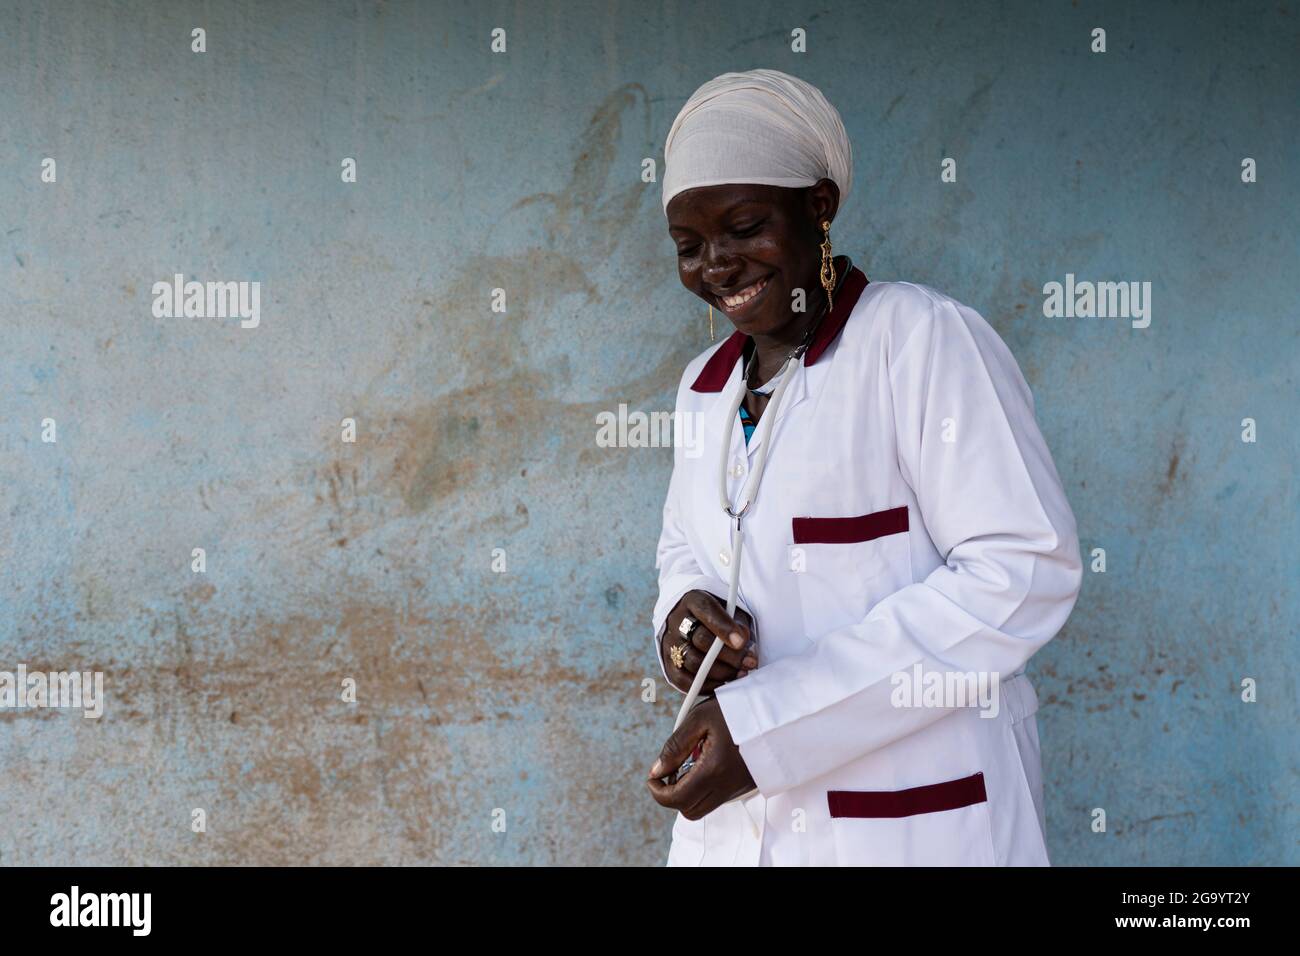 Beautiful smiling young Africanmedical intern with a stethoscope around her neck looking at the floor with a satisfied expression on her face after re Stock Photo